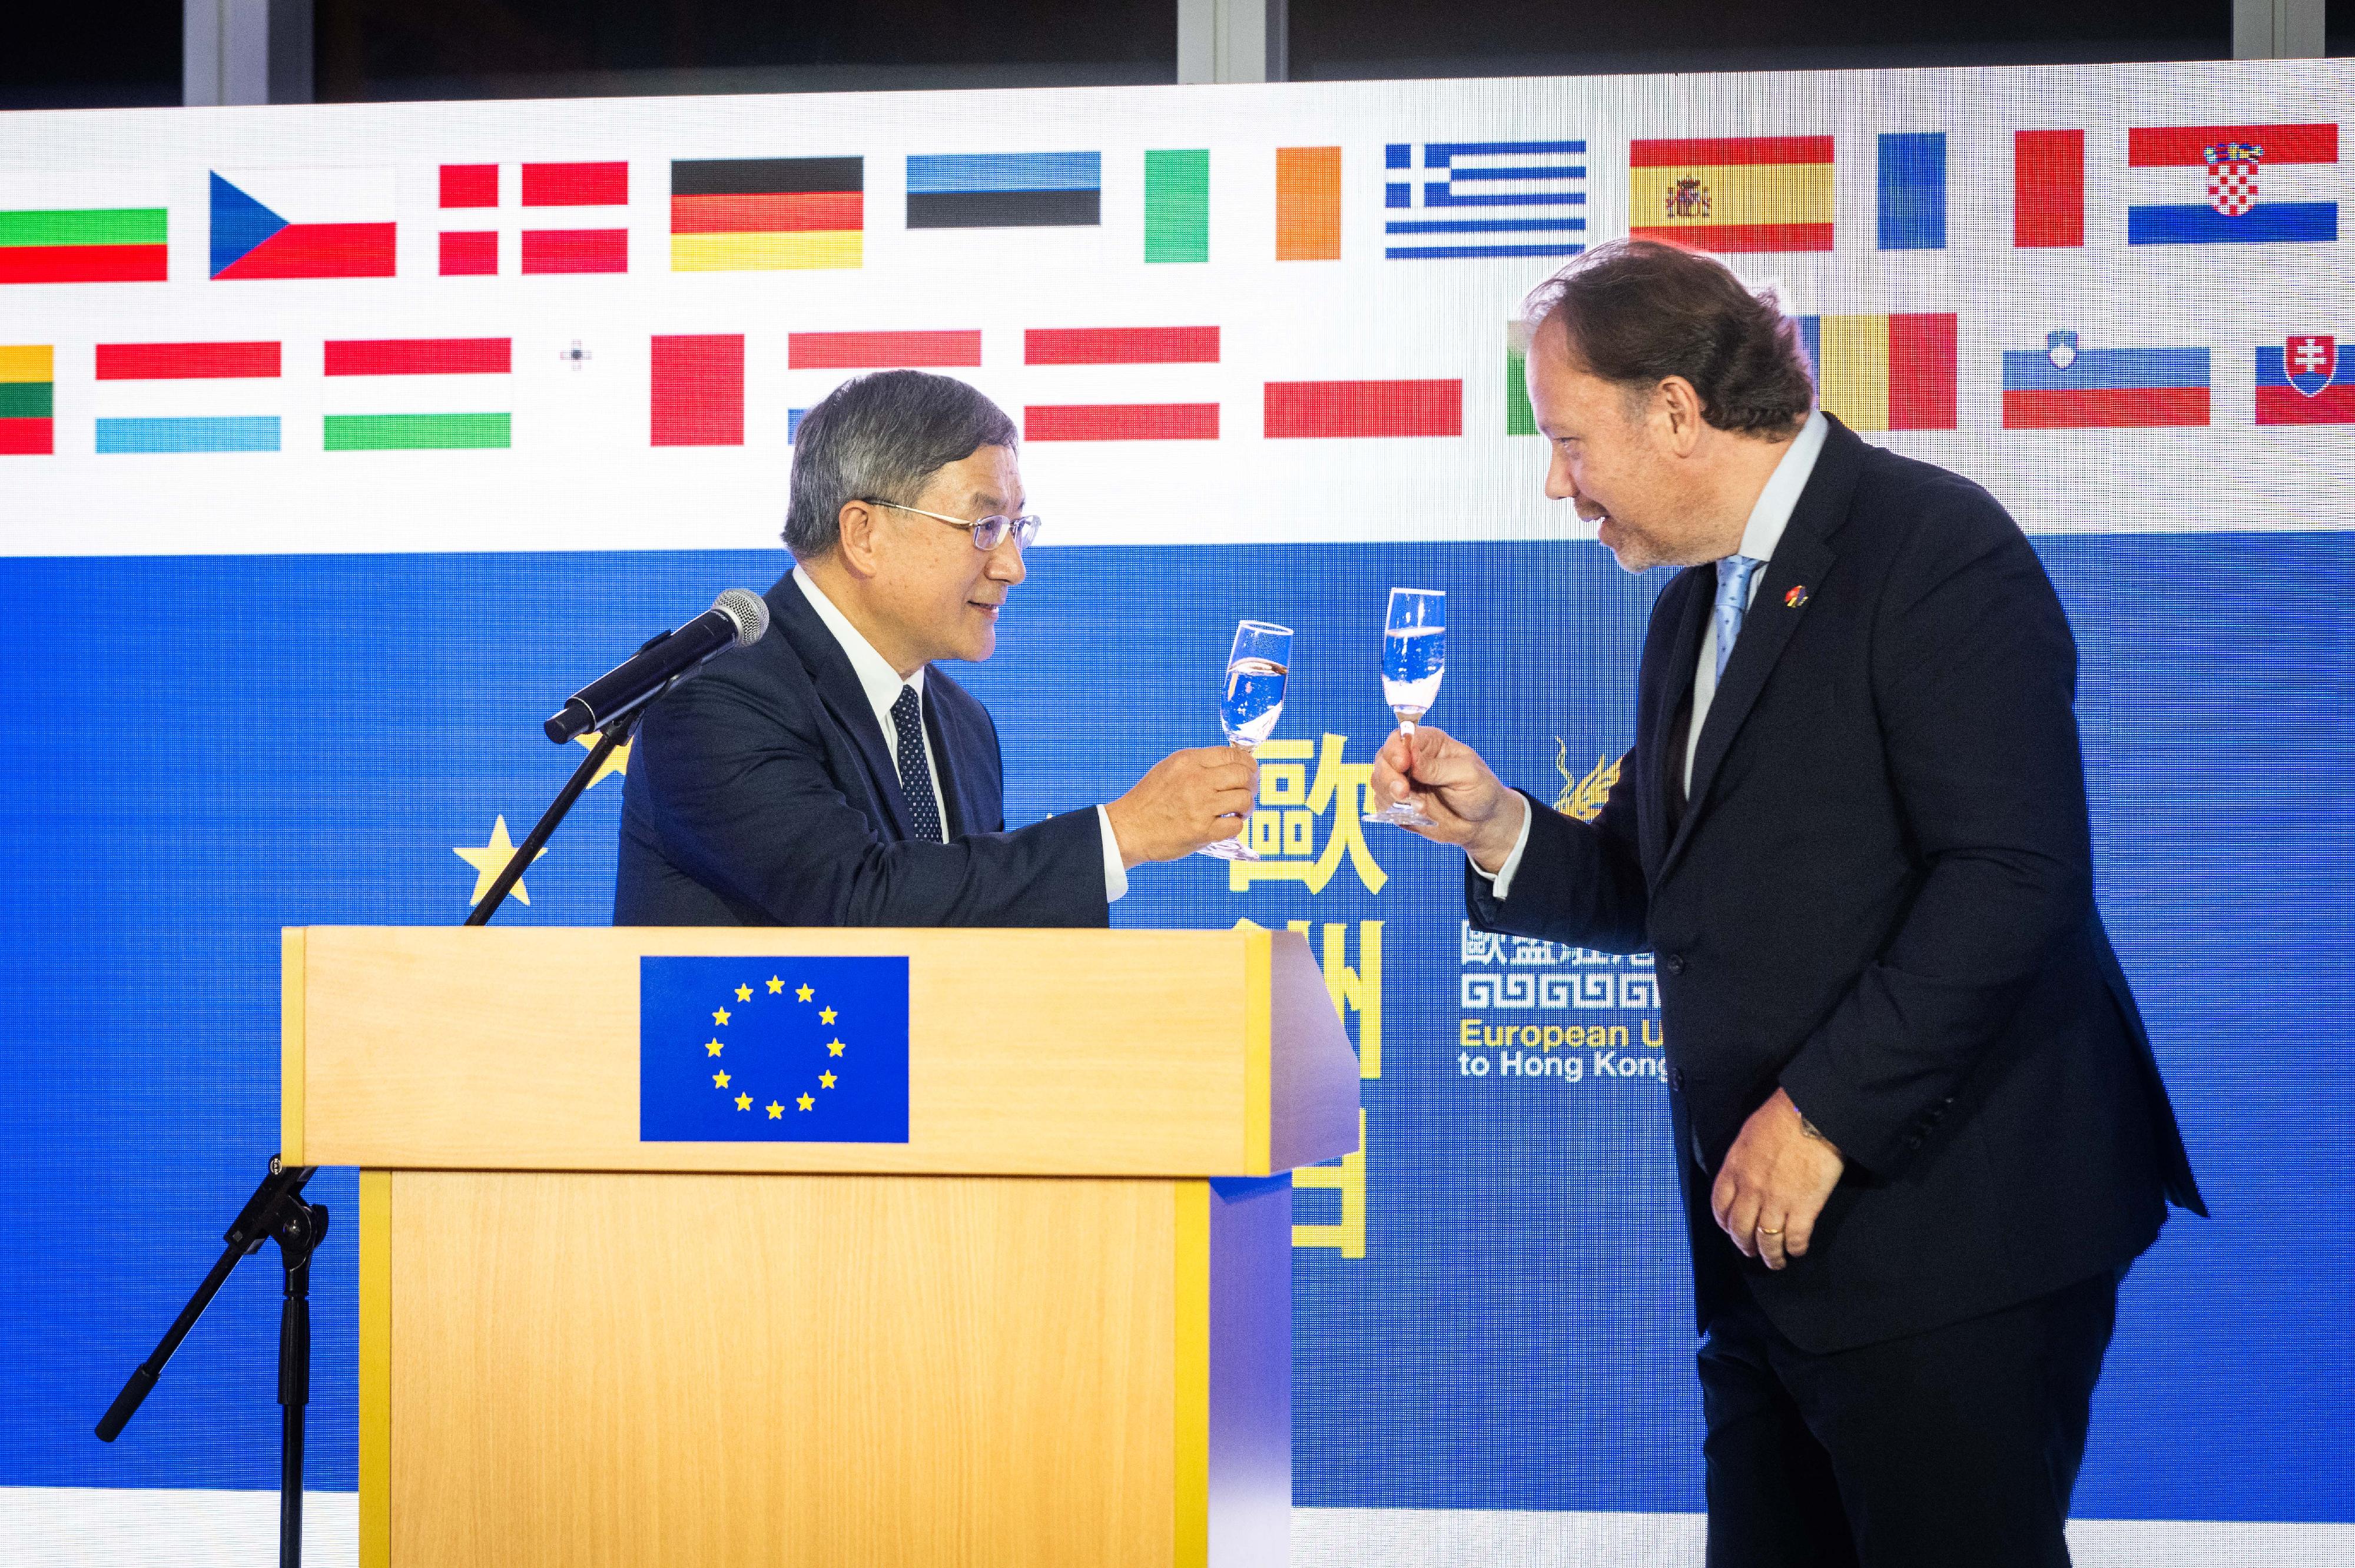 The Deputy Chief Secretary for Administration, Mr Cheuk Wing-hing (left), and the Head of the European Union Office to Hong Kong and Macao, Mr Thomas Gnocchi (right), propose a toast at the Europe Day Reception this evening (May 9).